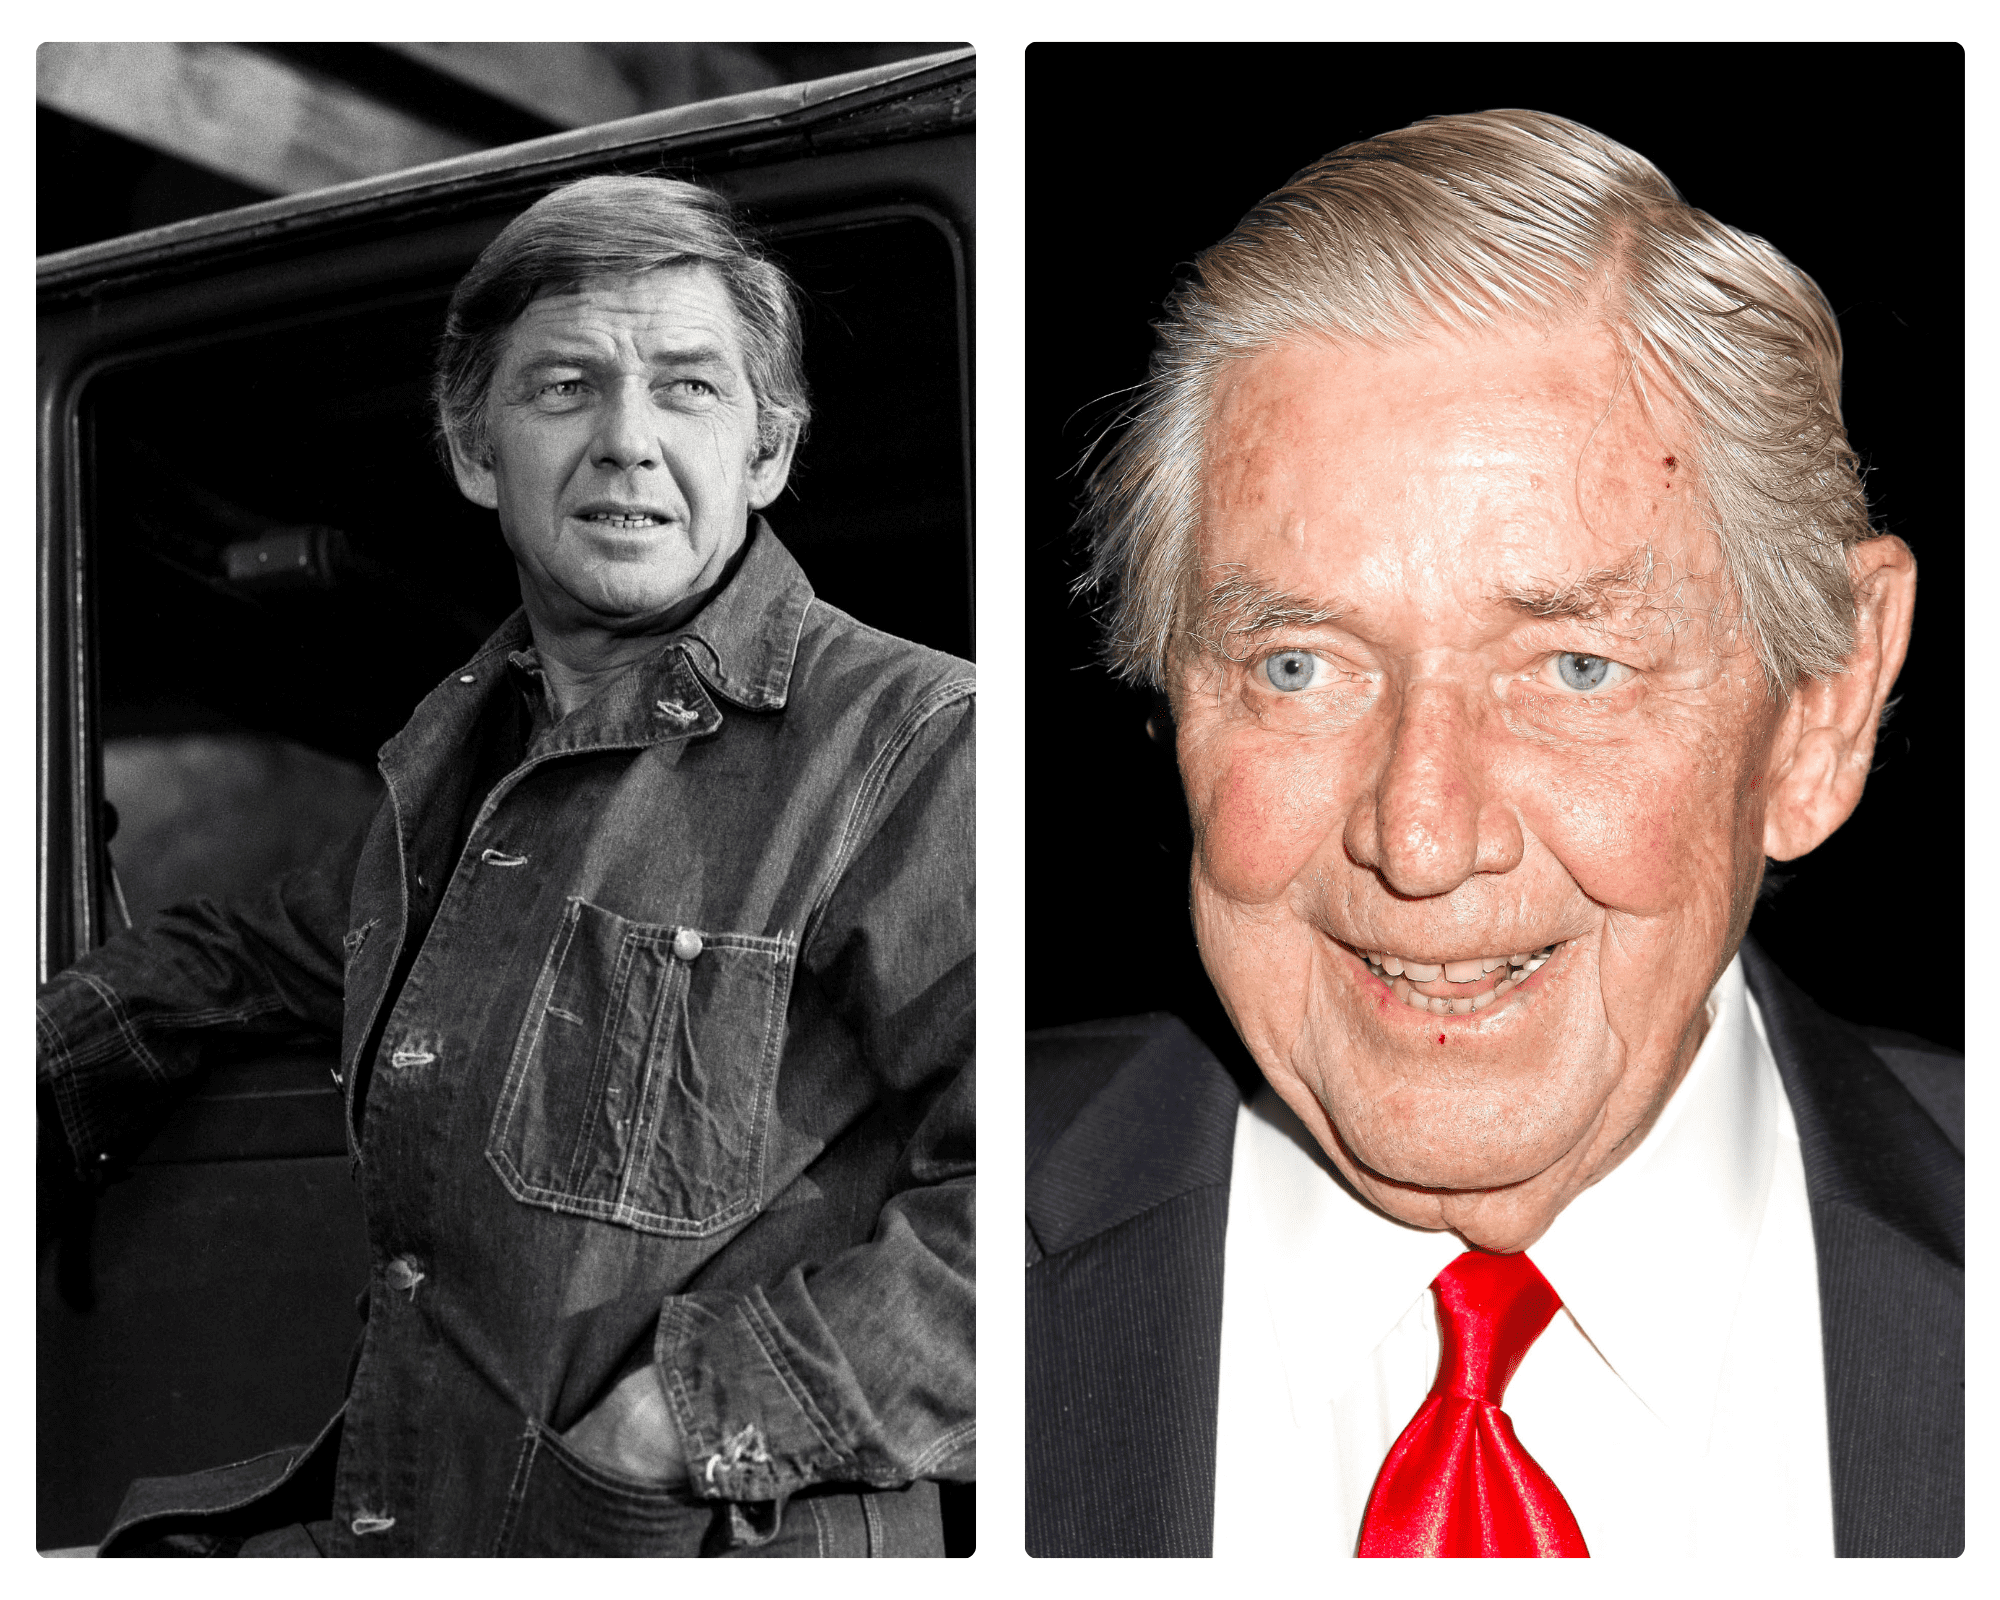 Ralph Waite | Source: Getty Images